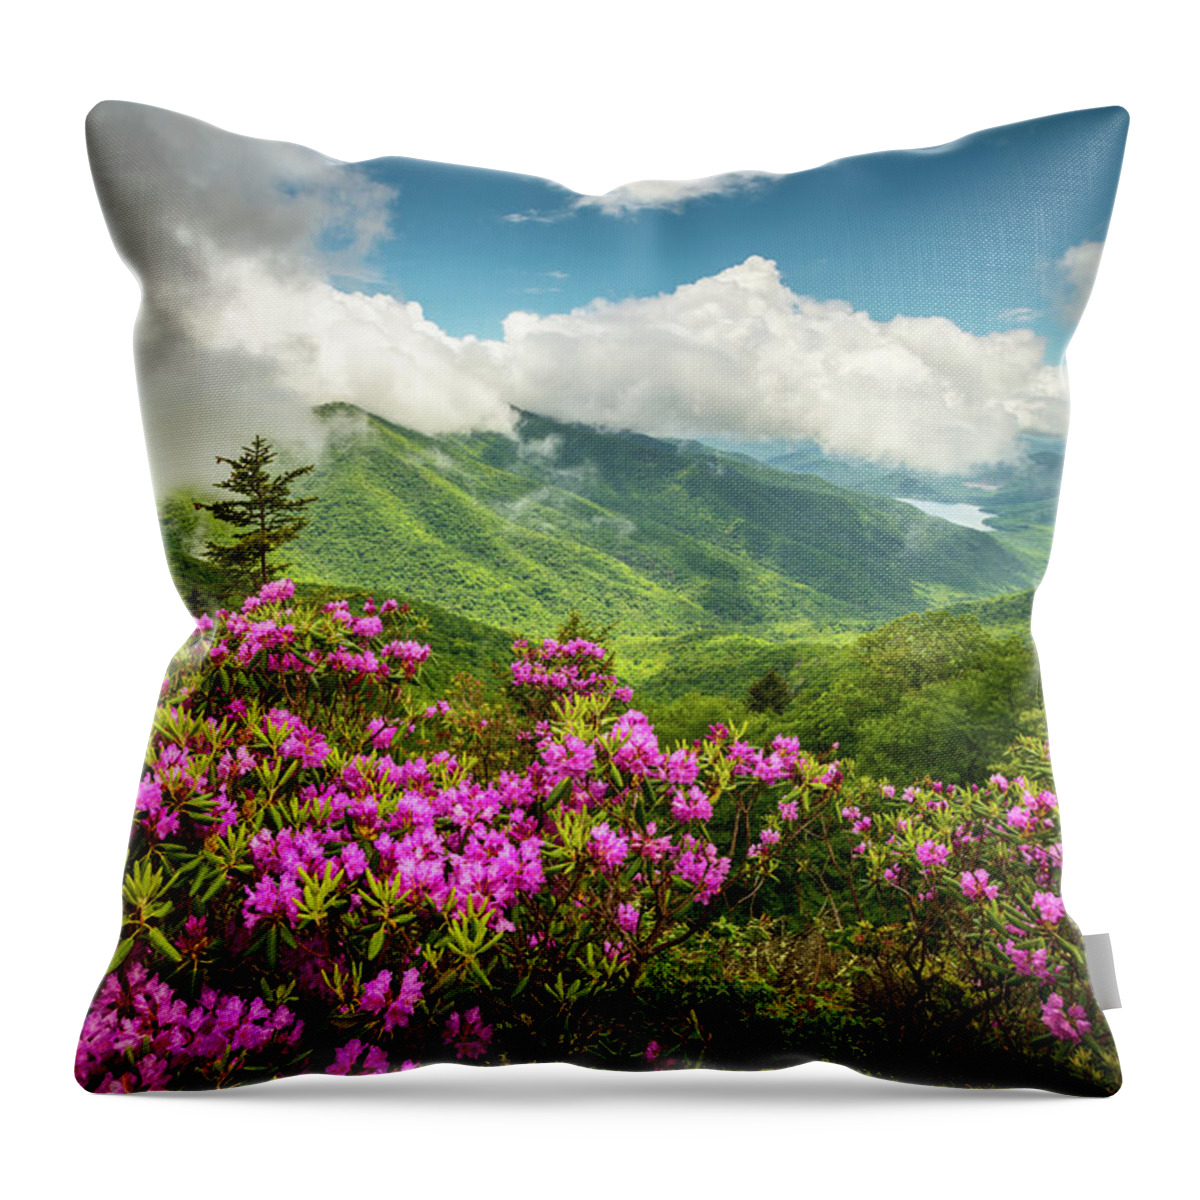 Asheville Throw Pillow featuring the photograph Appalachian Mountains Spring Flowers Scenic Landscape Asheville North Carolina Blue Ridge Parkway by Dave Allen